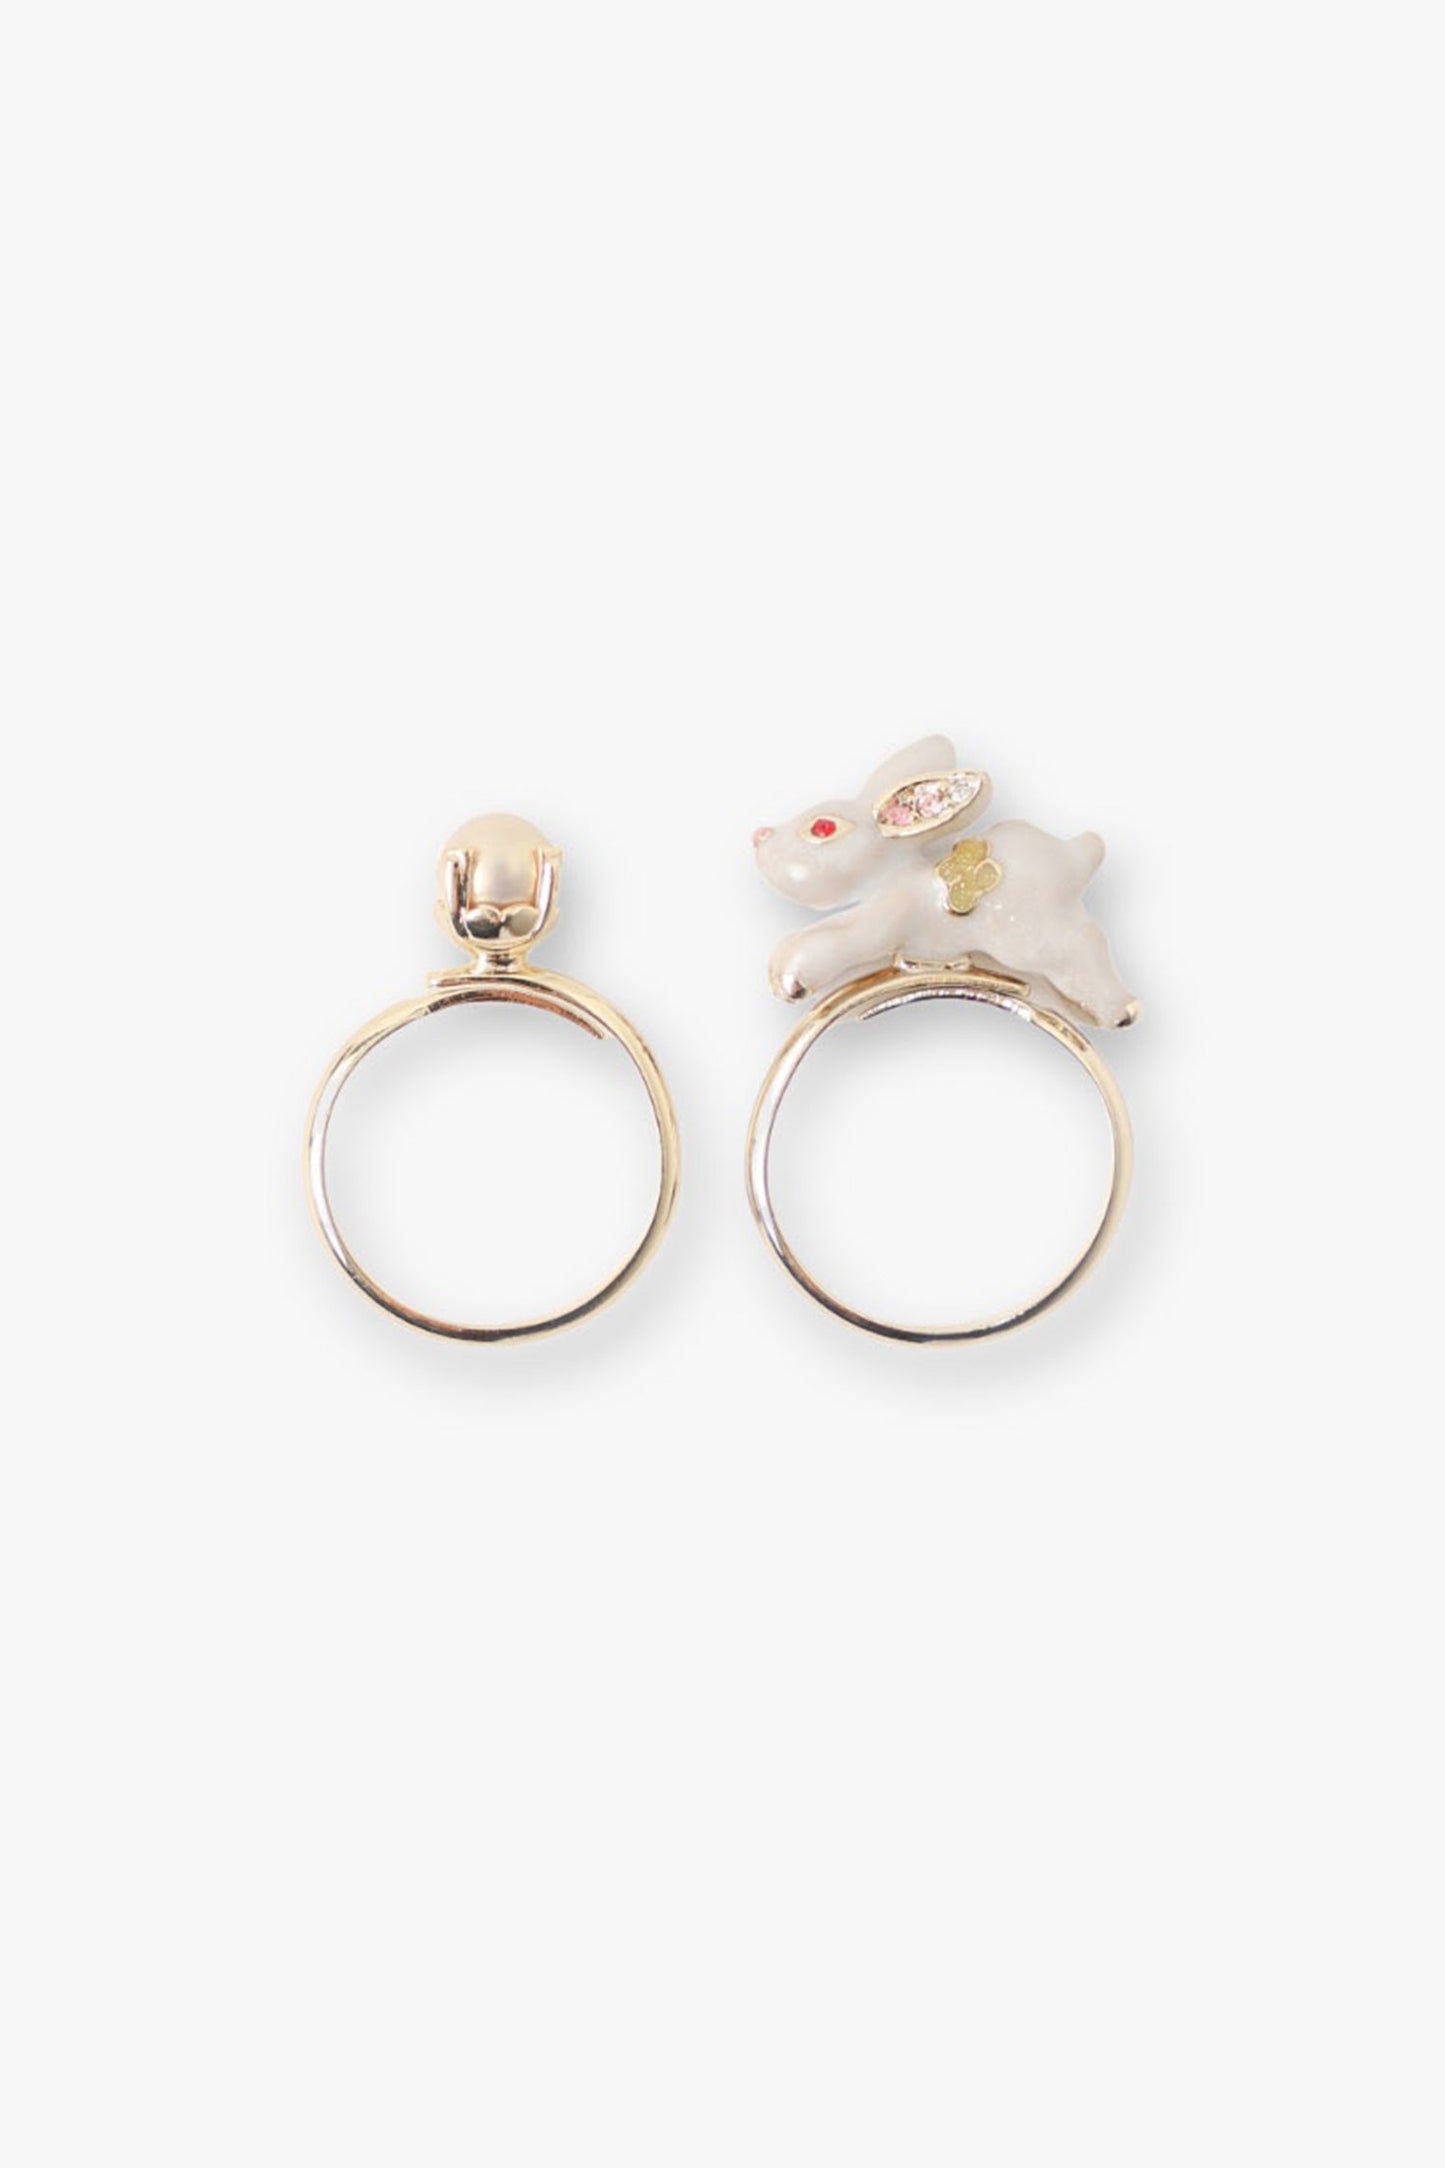 Ring set of White Rabbit and pearl, yellow gold color plating, synthetic resin, glass, artificial pearl